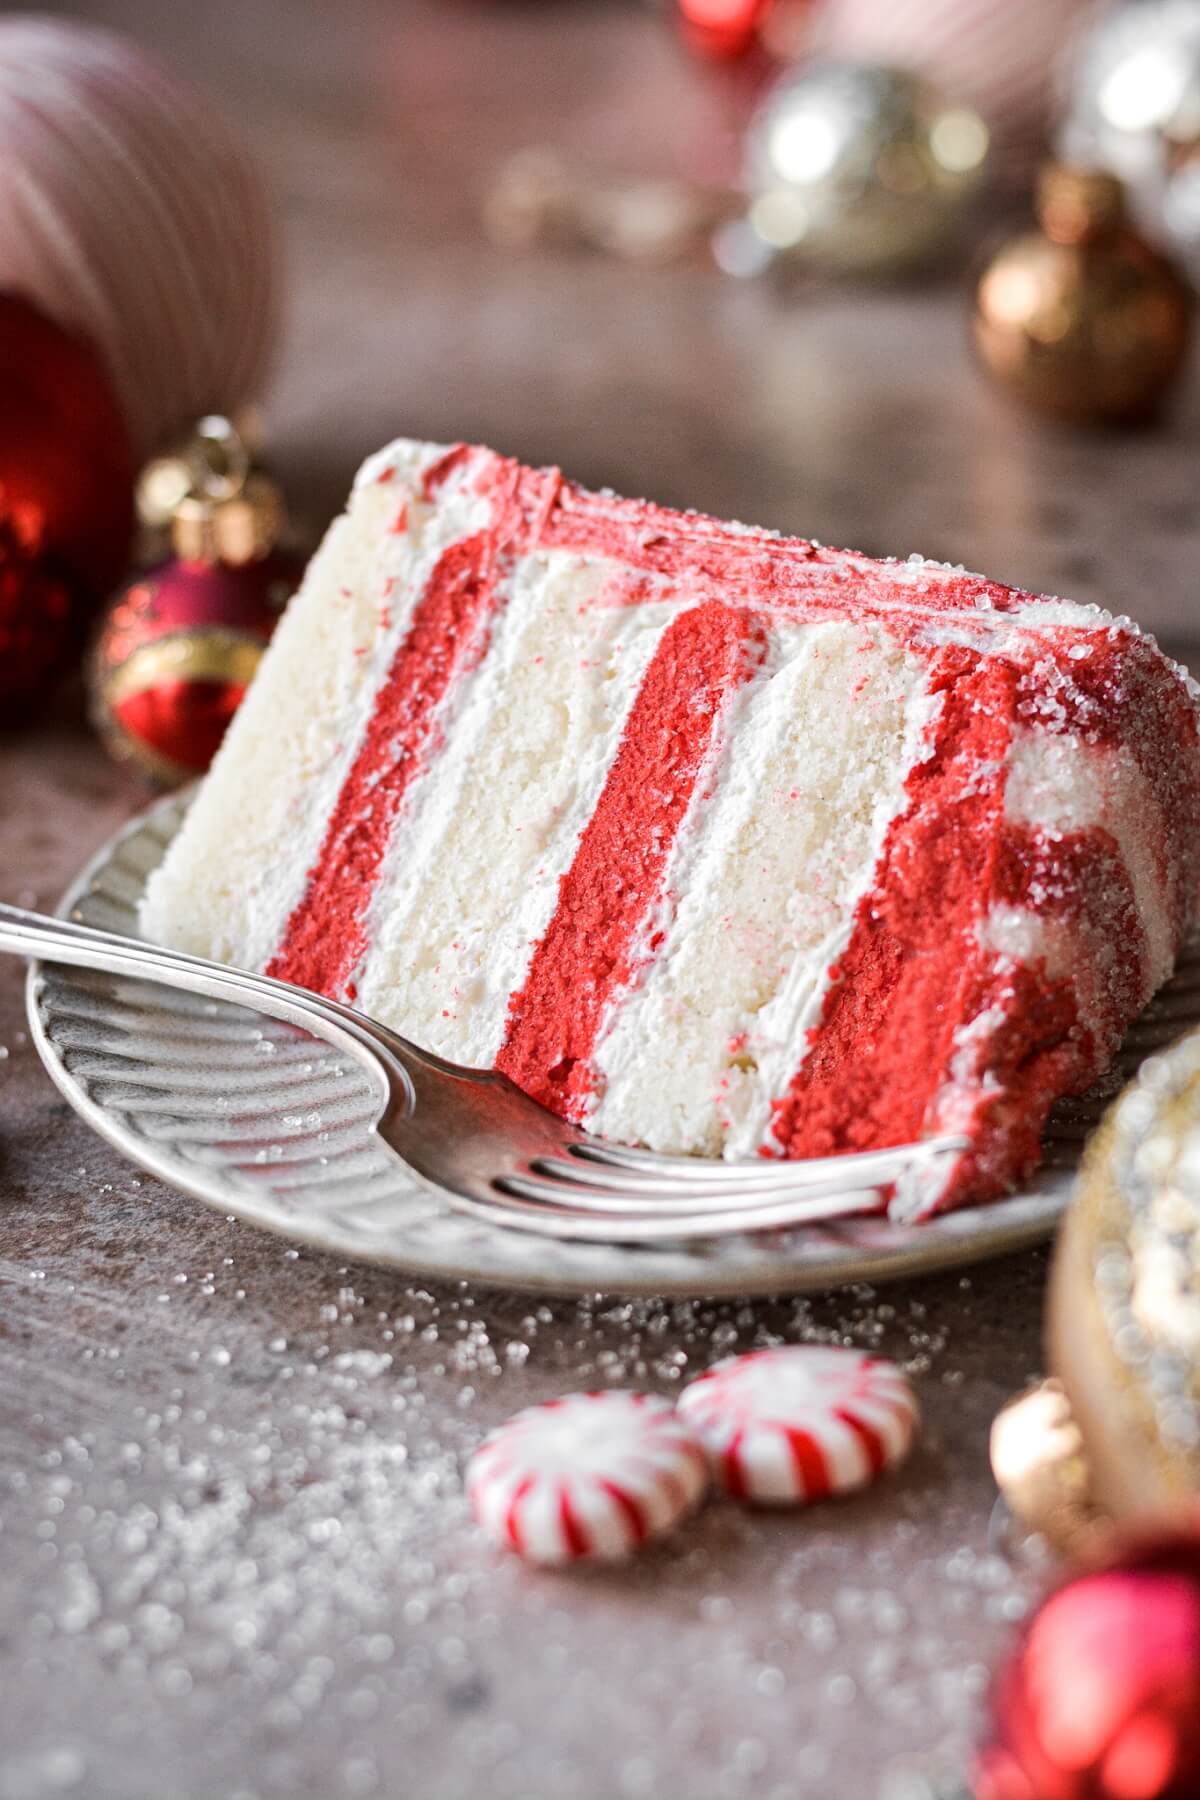 Slice of red and white cake.